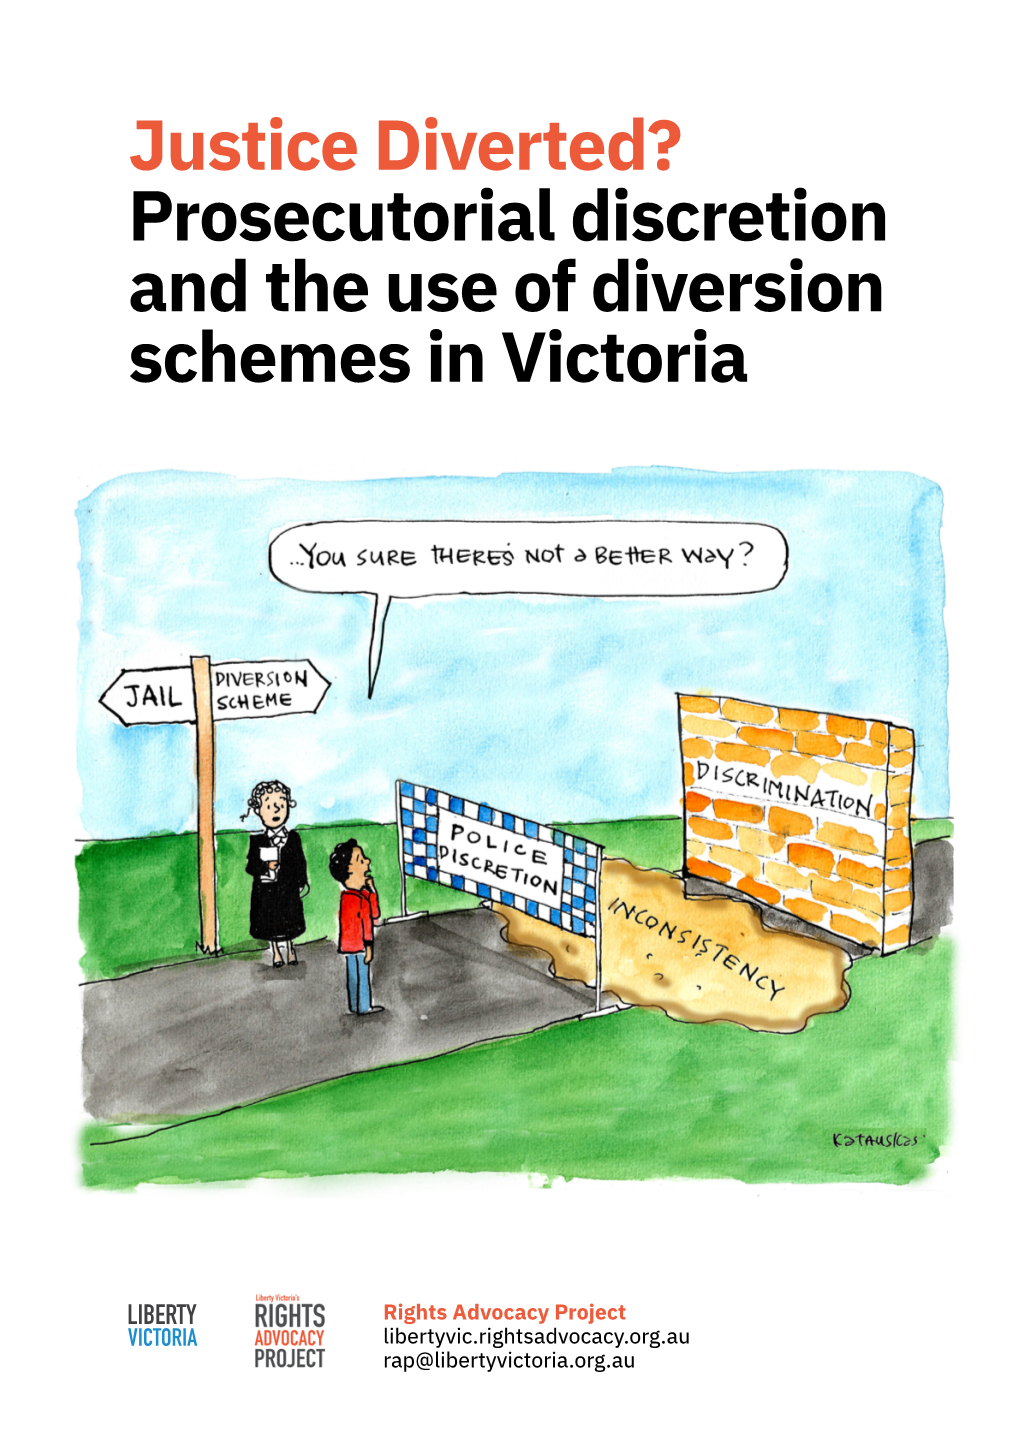 Justice Diverted? Prosecutorial Discretion and the Use of Diversion Schemes in Victoria